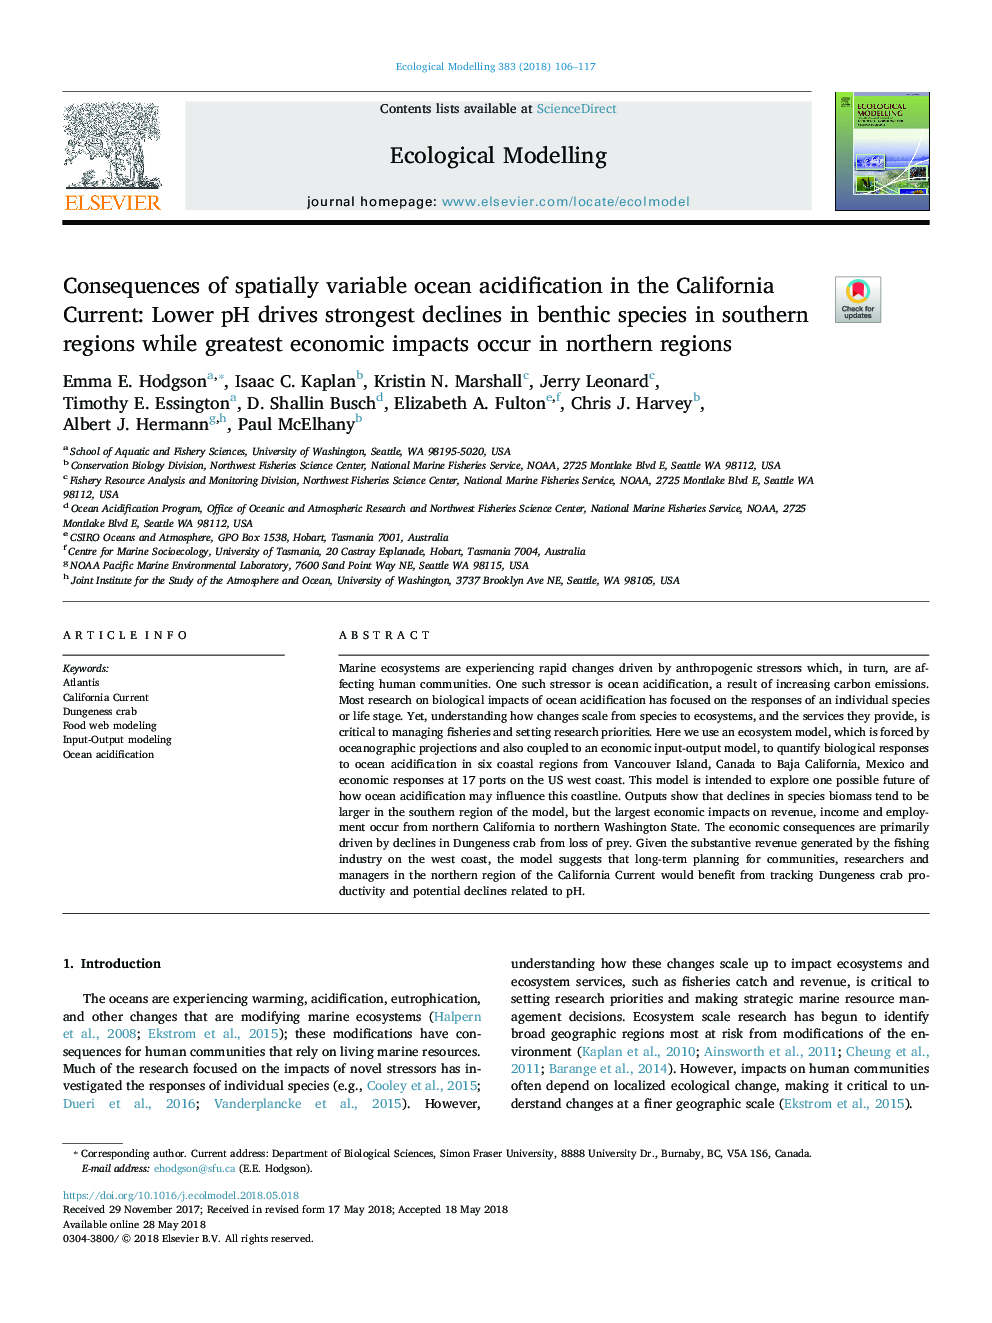 Consequences of spatially variable ocean acidification in the California Current: Lower pH drives strongest declines in benthic species in southern regions while greatest economic impacts occur in northern regions